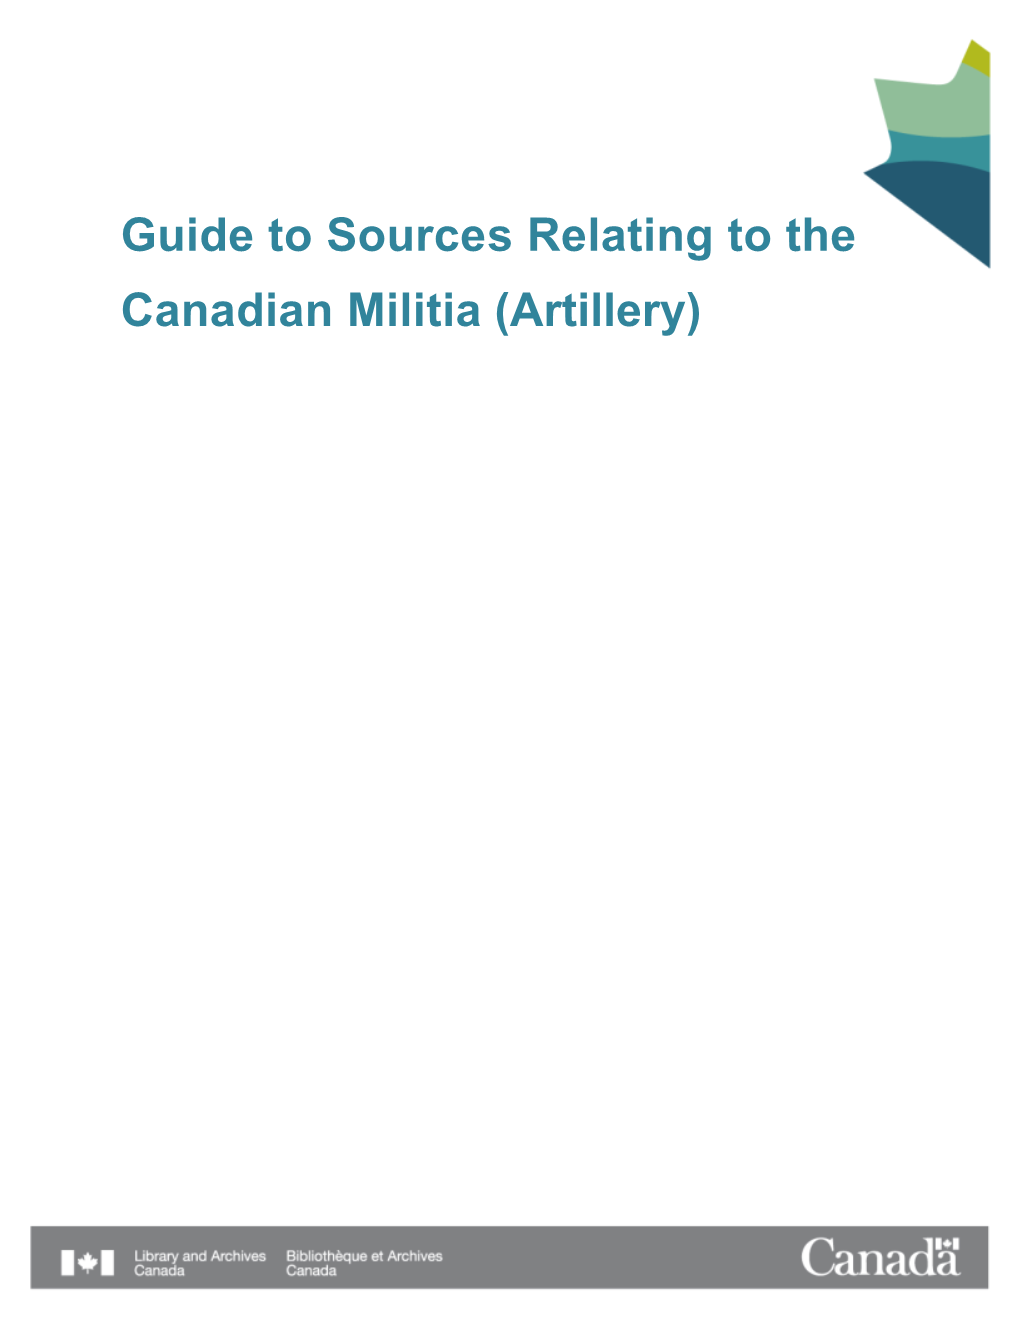 Guide to Sources Relating to the Canadian Militia (Artillery)